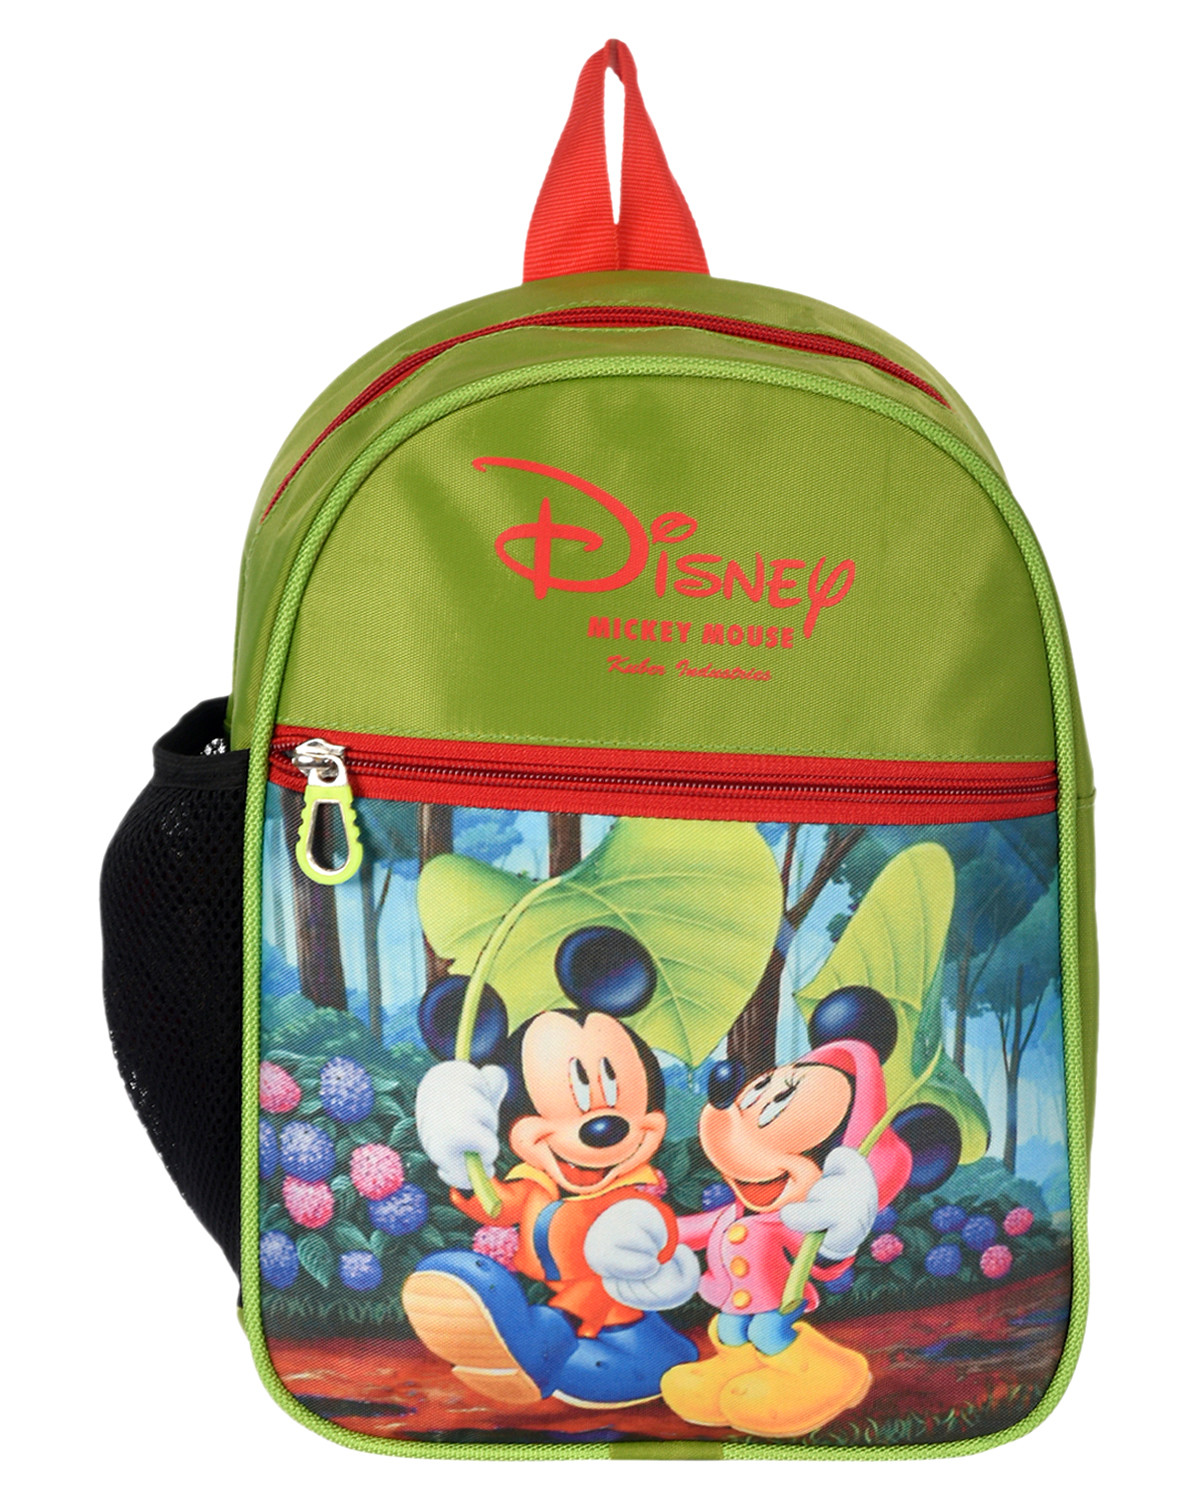 Kuber Industries Mickey & Minnie Print Kids Backpack Bag for School, Travel, Casual, Picnics (Green)